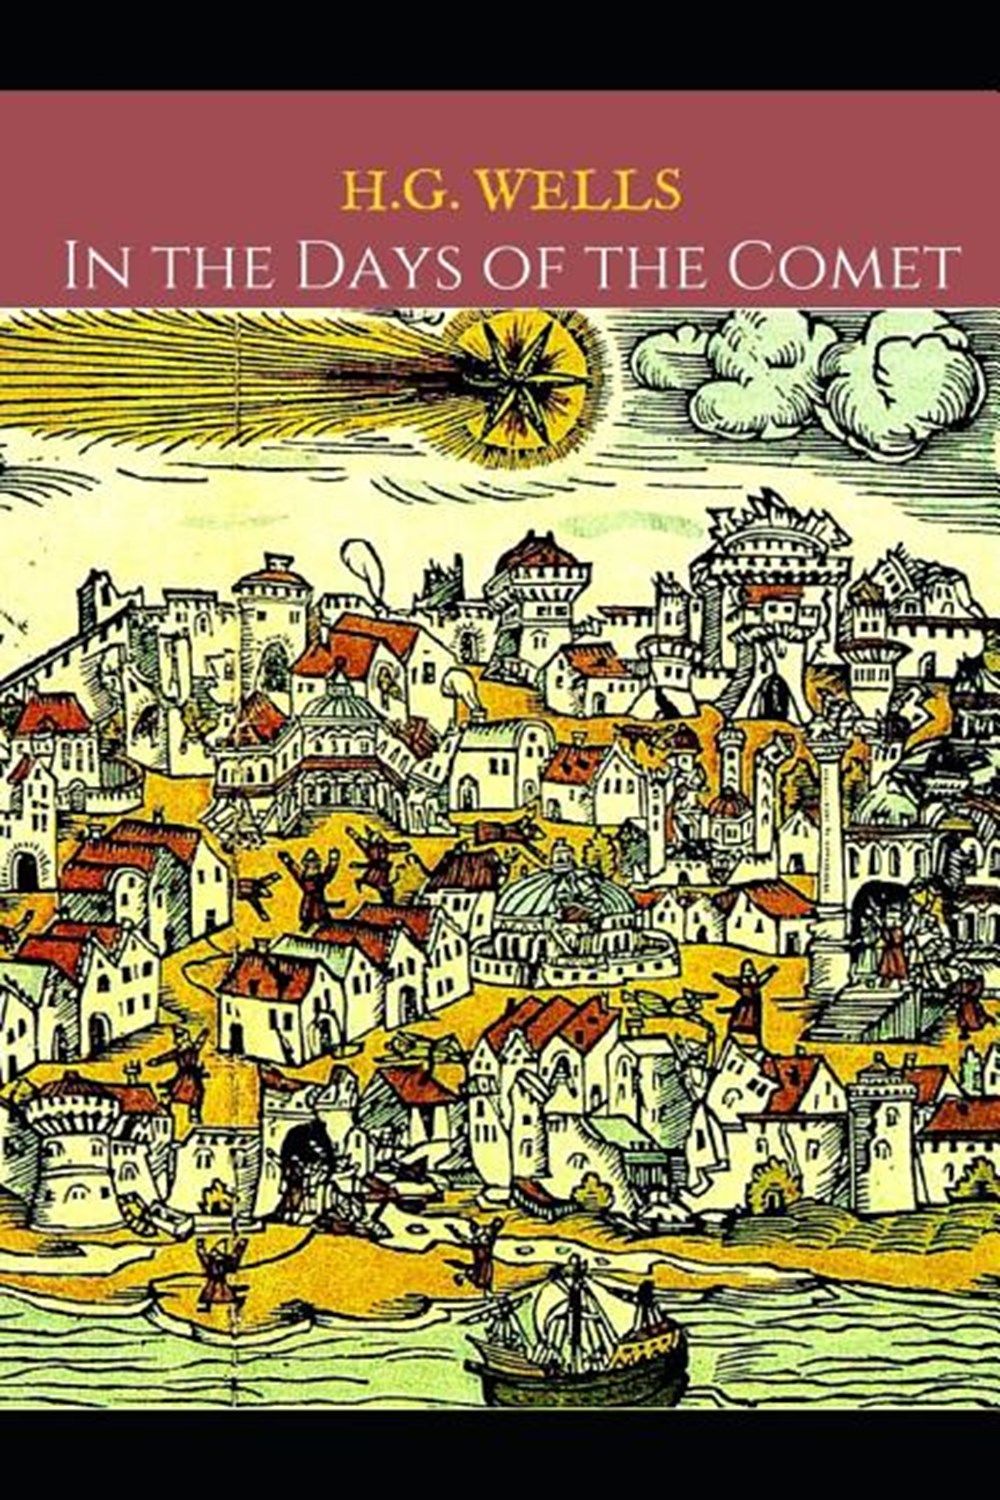 In The Days Of The Comet A First Unabridged Edition (Annotated) By H.G. Wells.